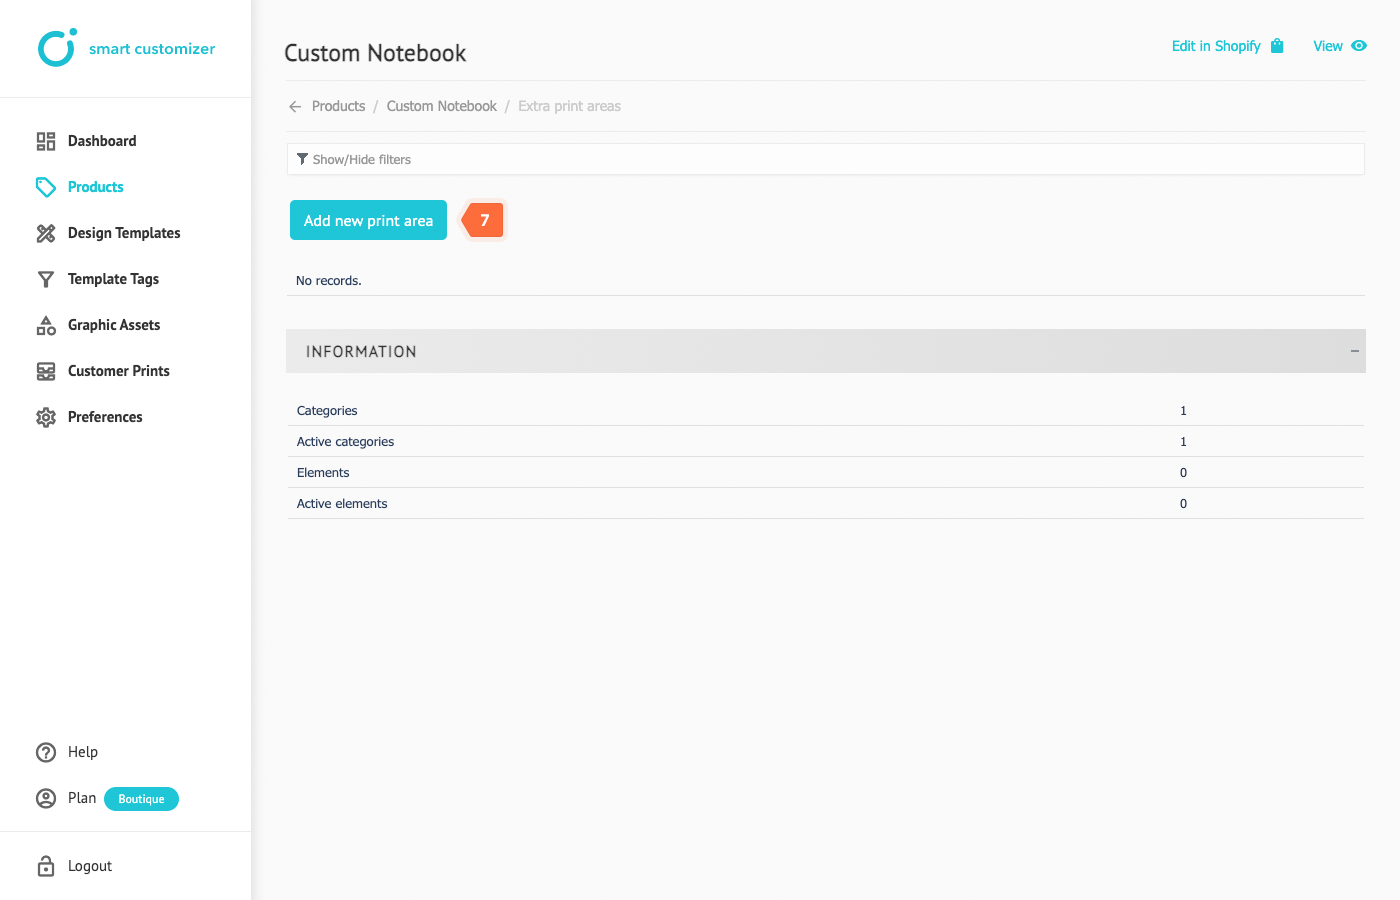 New print areas in customizer